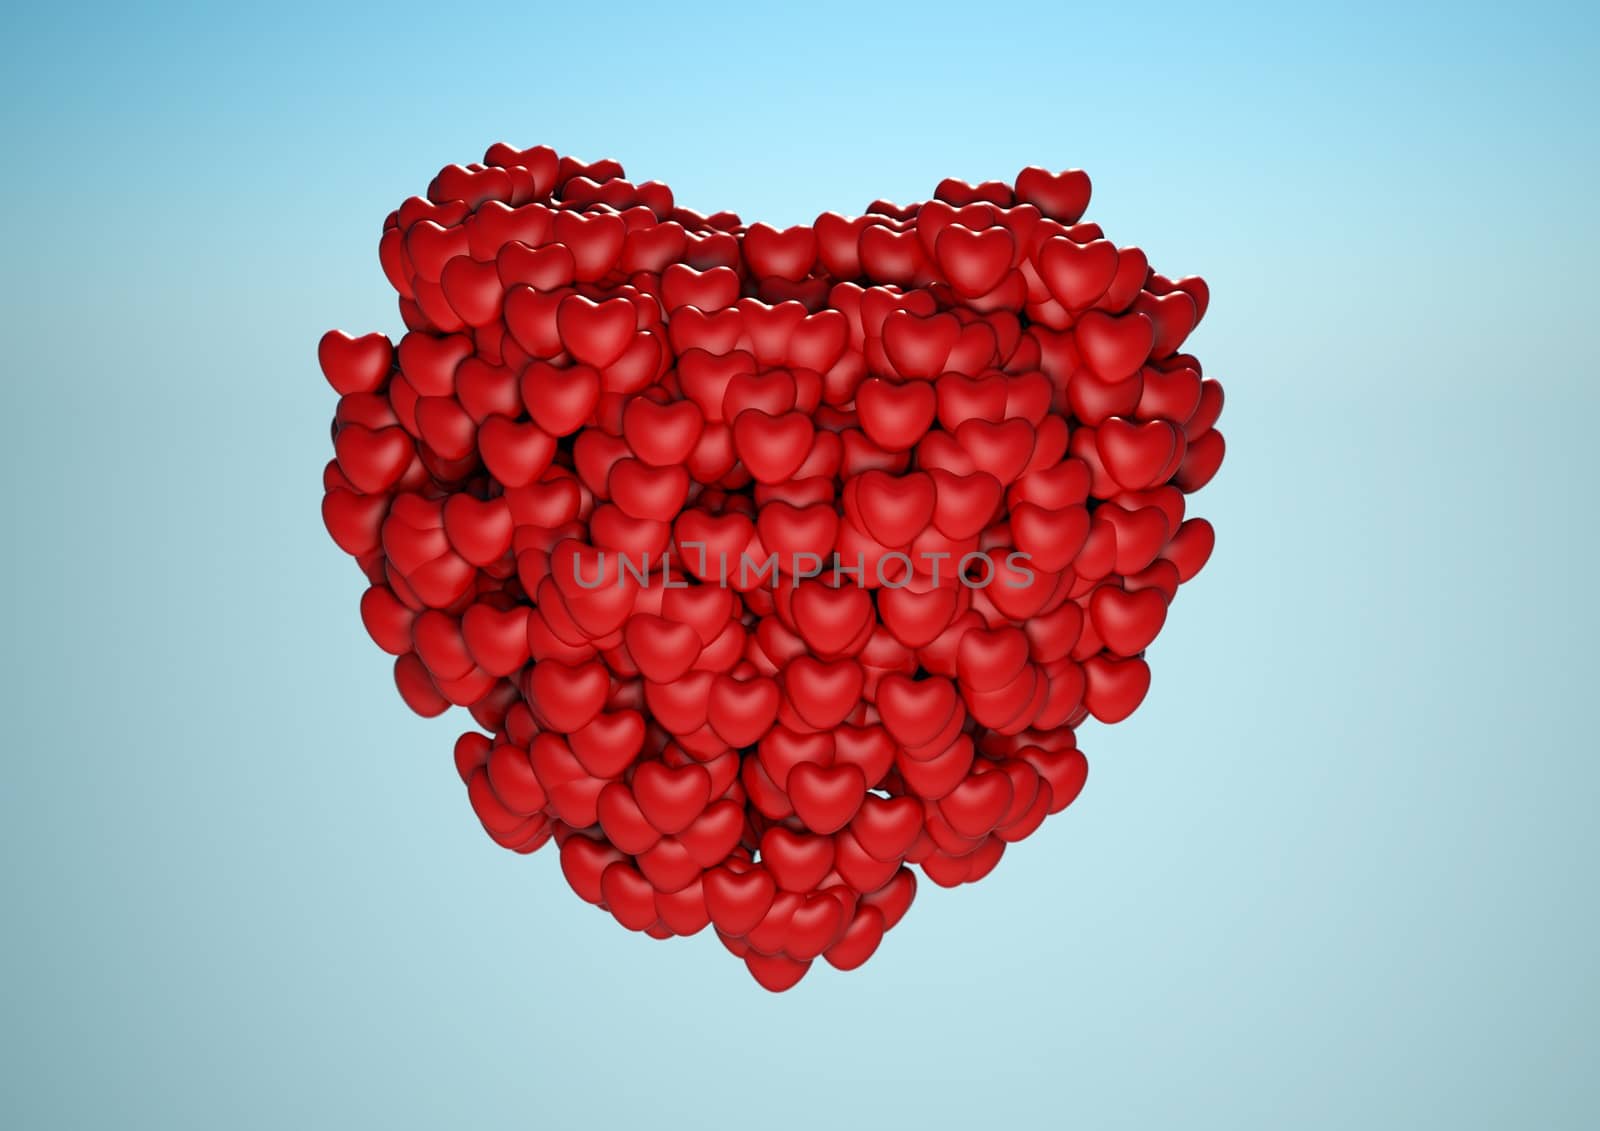 Illustration of a big heart made of many smaller hearts. Symbol of unity.